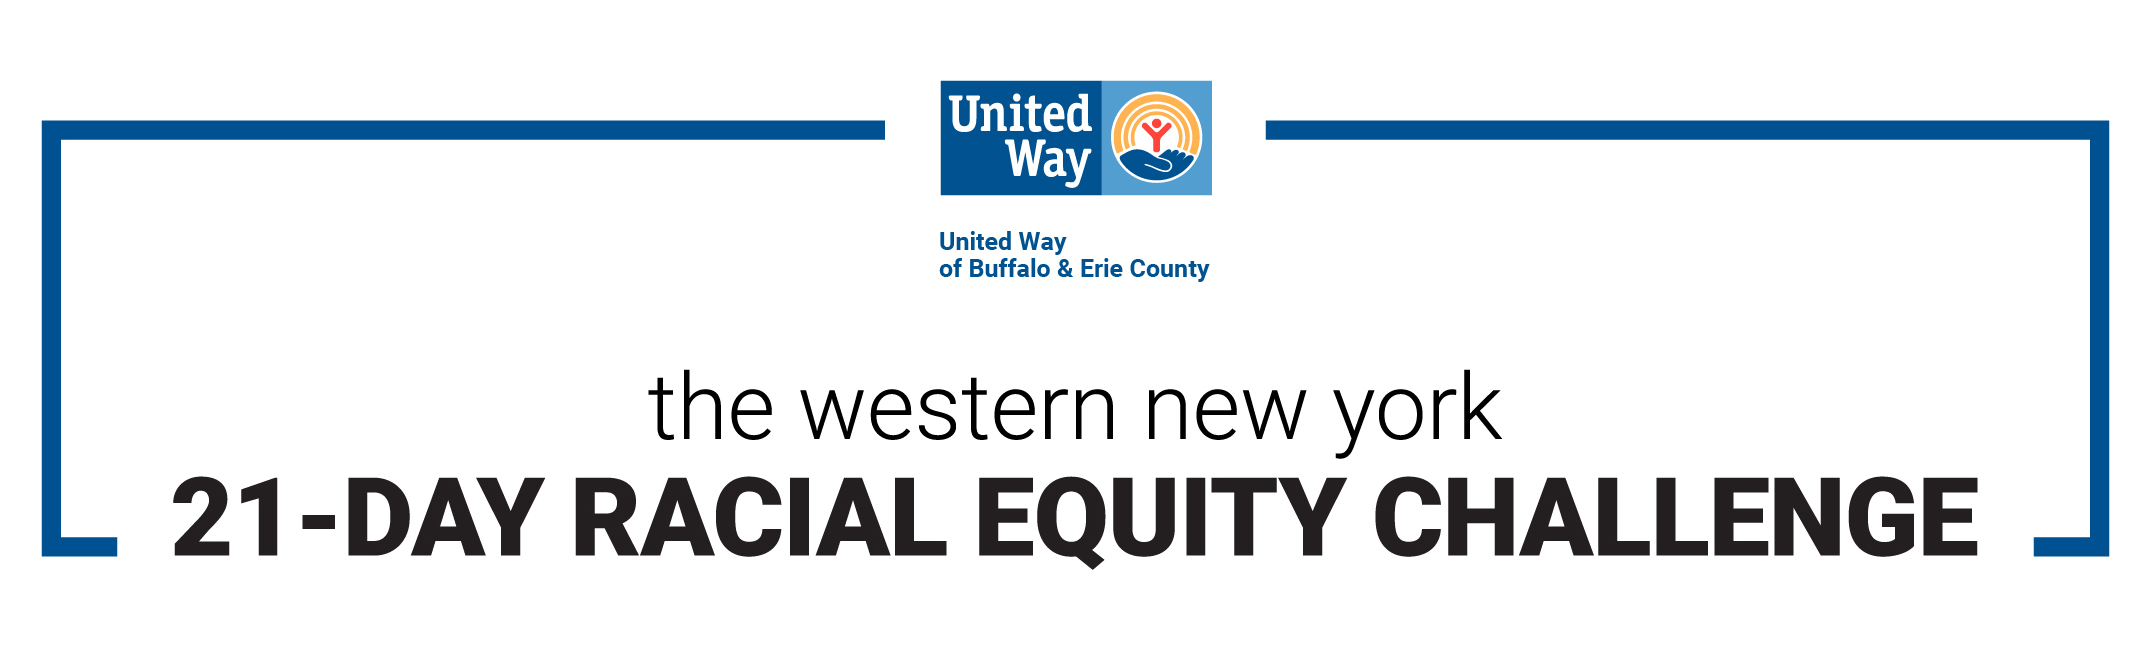 The Western New York 21-Day Racial Equity Challenge Day 3